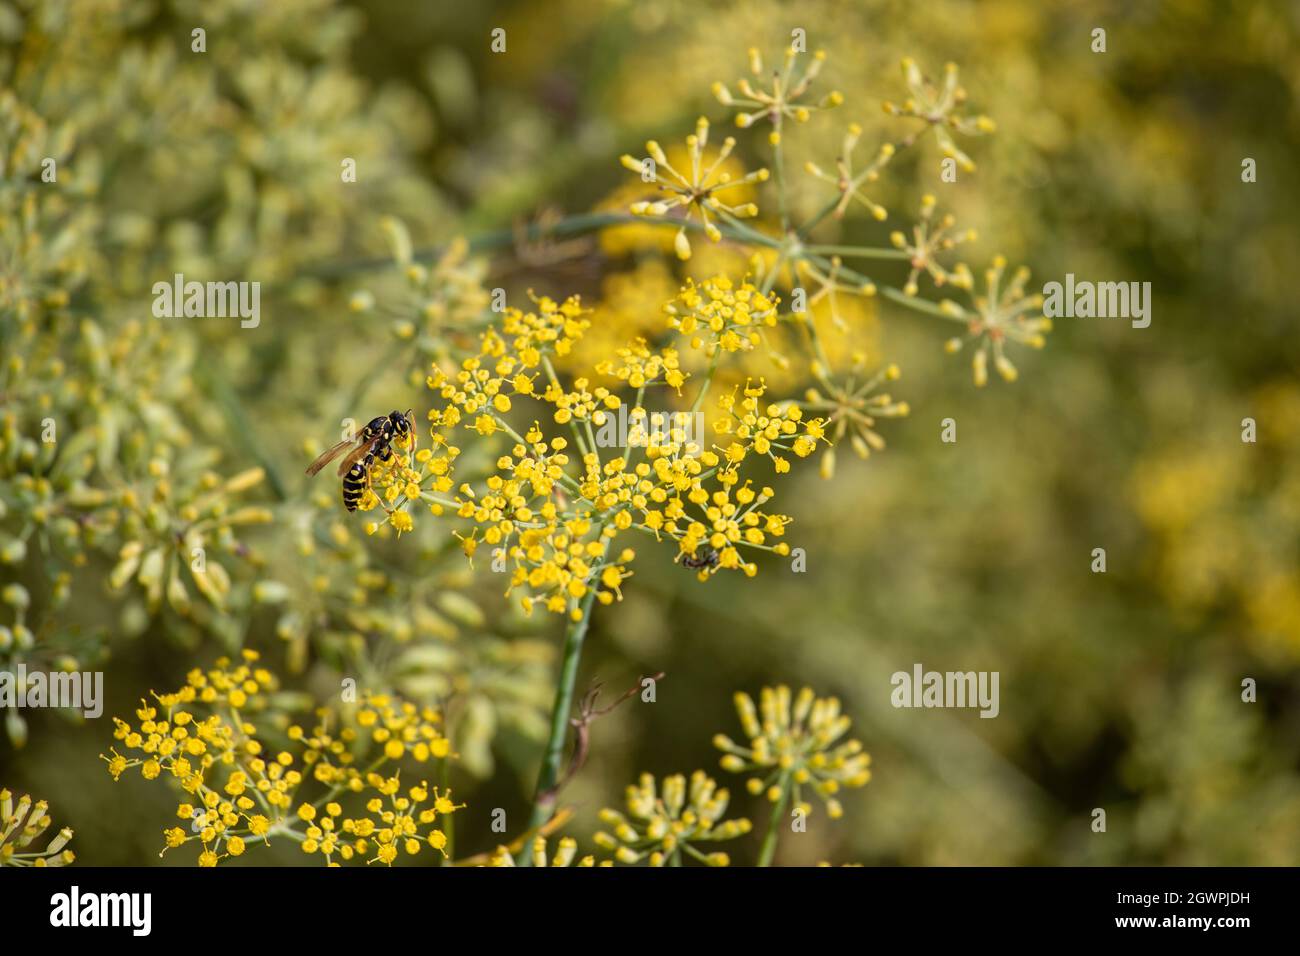 Close up of wasp standing on pimpinella anisum flowers in field Stock Photo